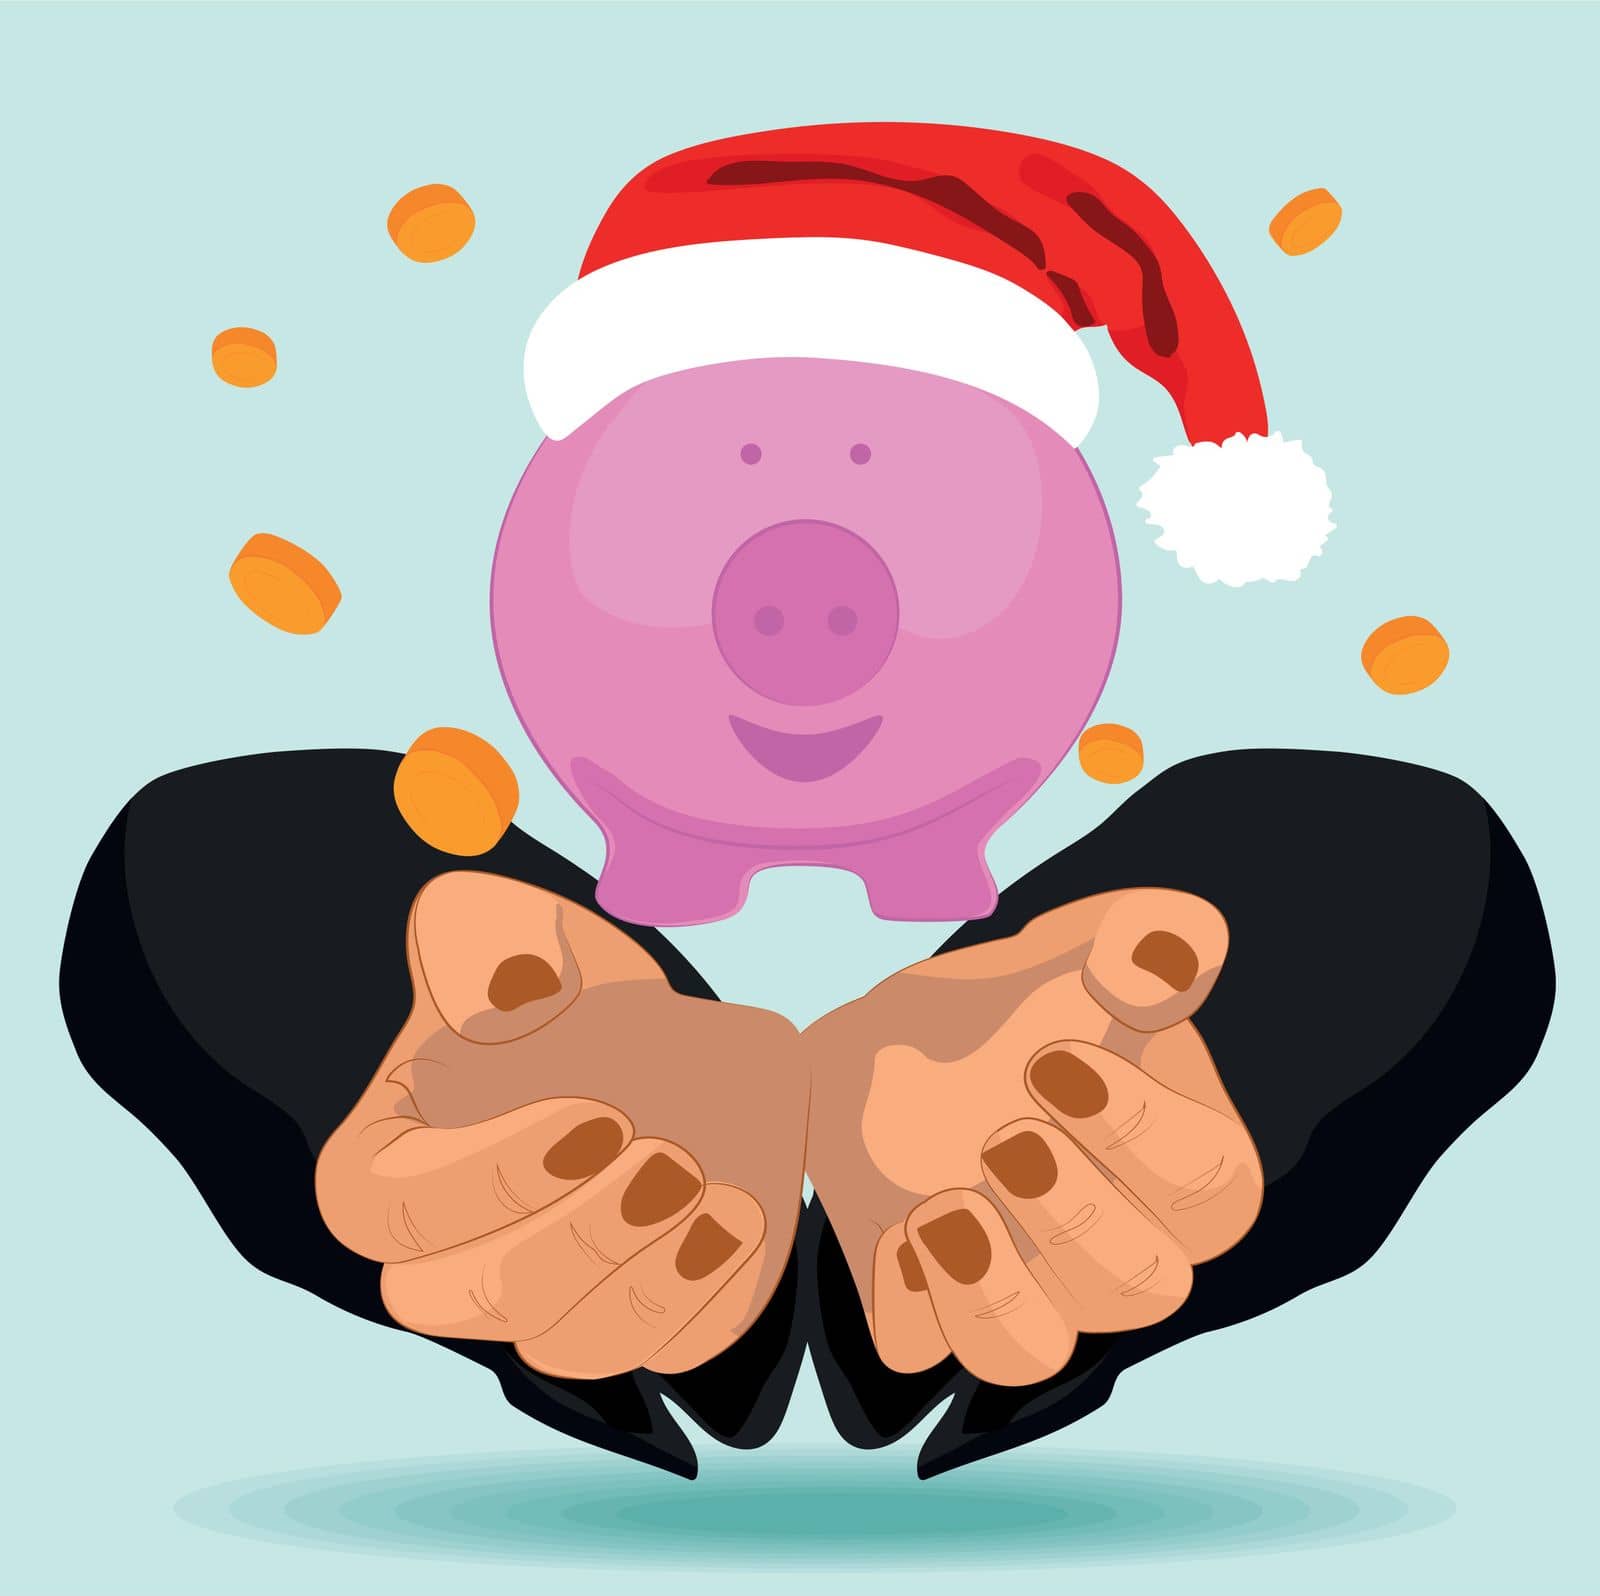 New Year is coming. Flat drawing of male hand putting coin into a piggy-bank to manage finances save money spend earnings with economy plan family budget. Vector illustration